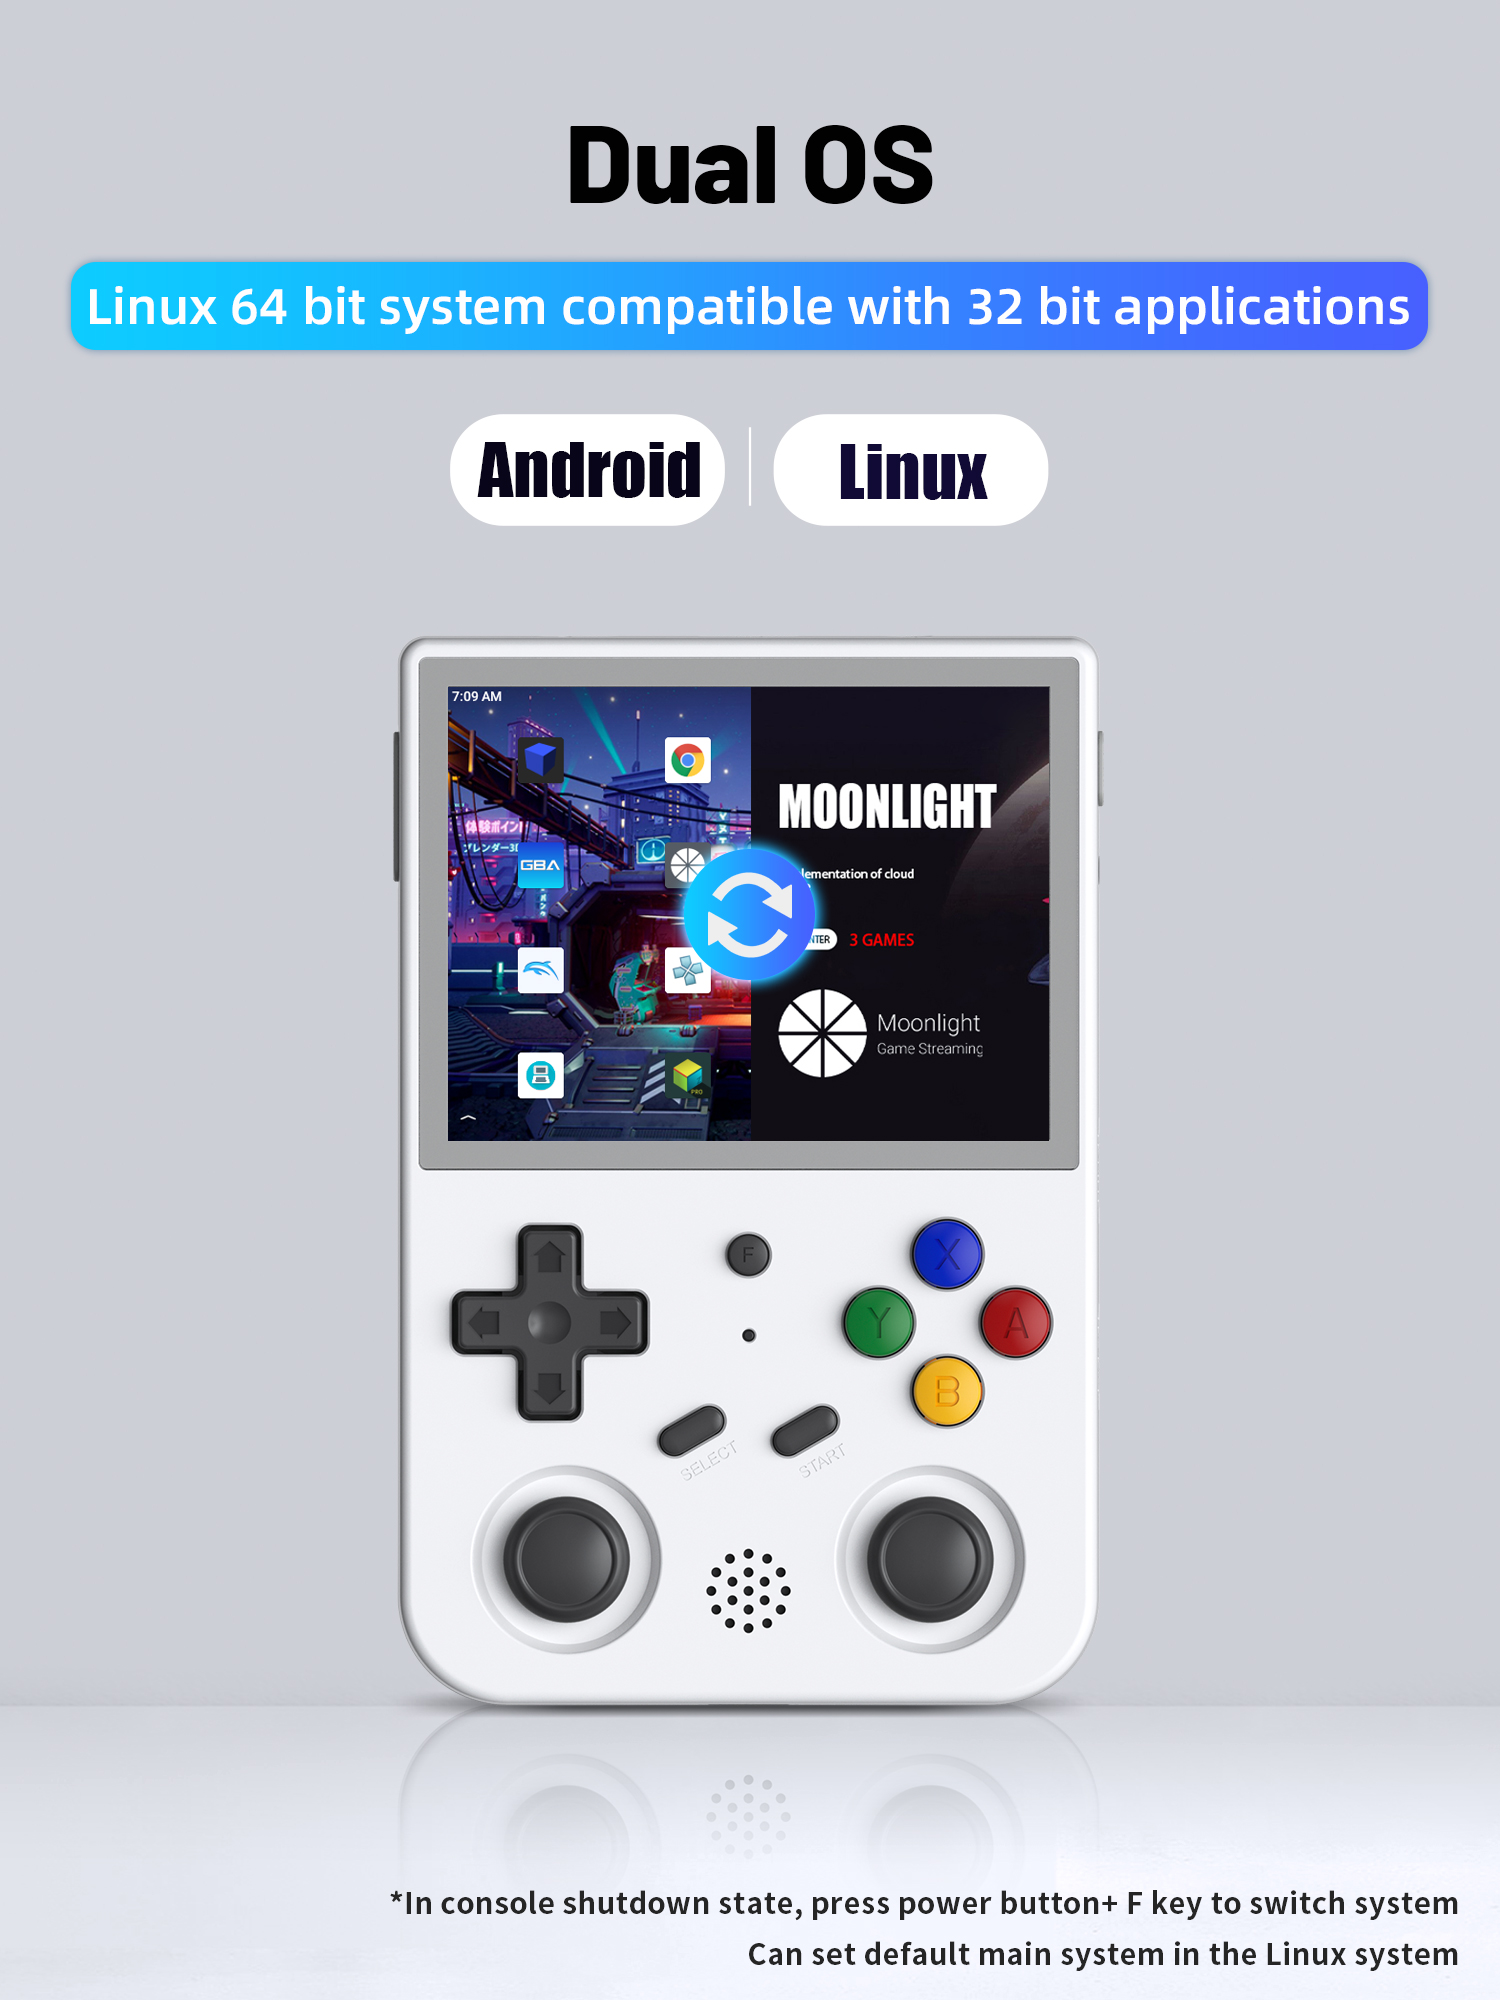 ANBERNIC RG353V 128GB 25000 Games Android Linux Dual OS Handheld Game Console LPDDR4 2GB RAM eMMC 5.1 32GB ROM 5G WiF BT4.2 3.5 inch IPS Full View Retro Video Game Player